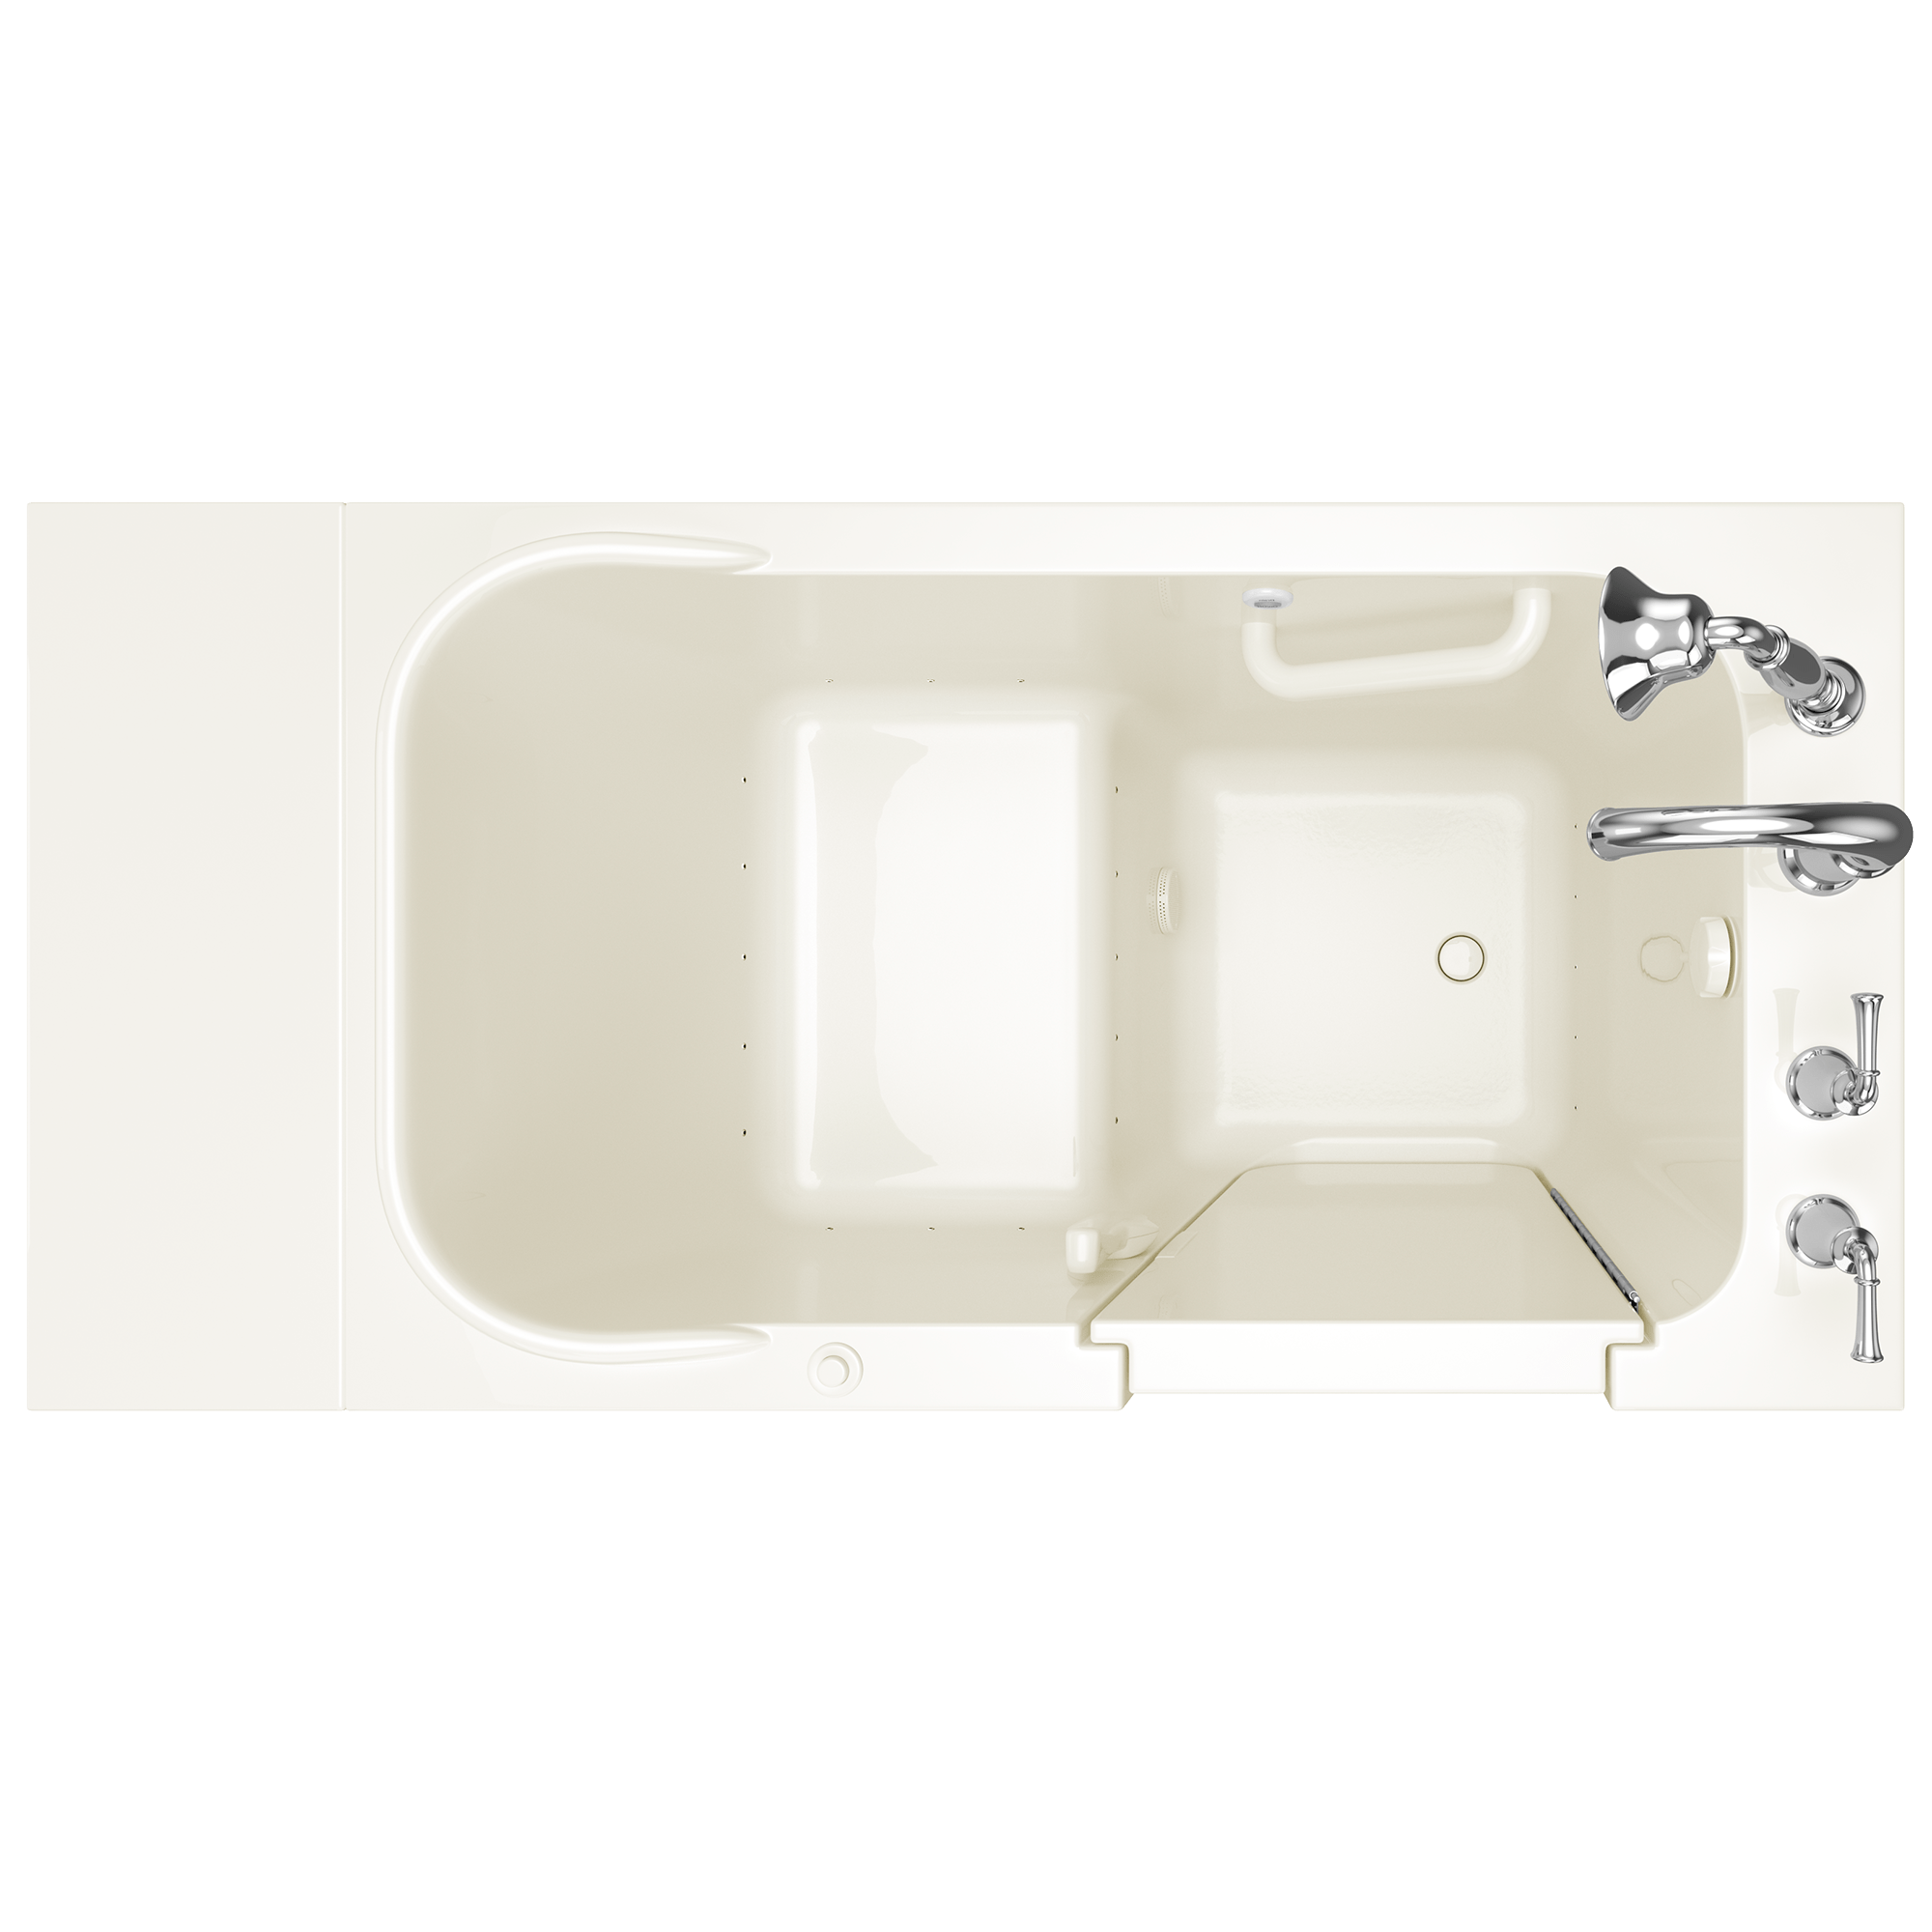 Gelcoat Value Series 28 x 48-Inch Walk-in Tub With Air Spa System - Right-Hand Drain With Faucet